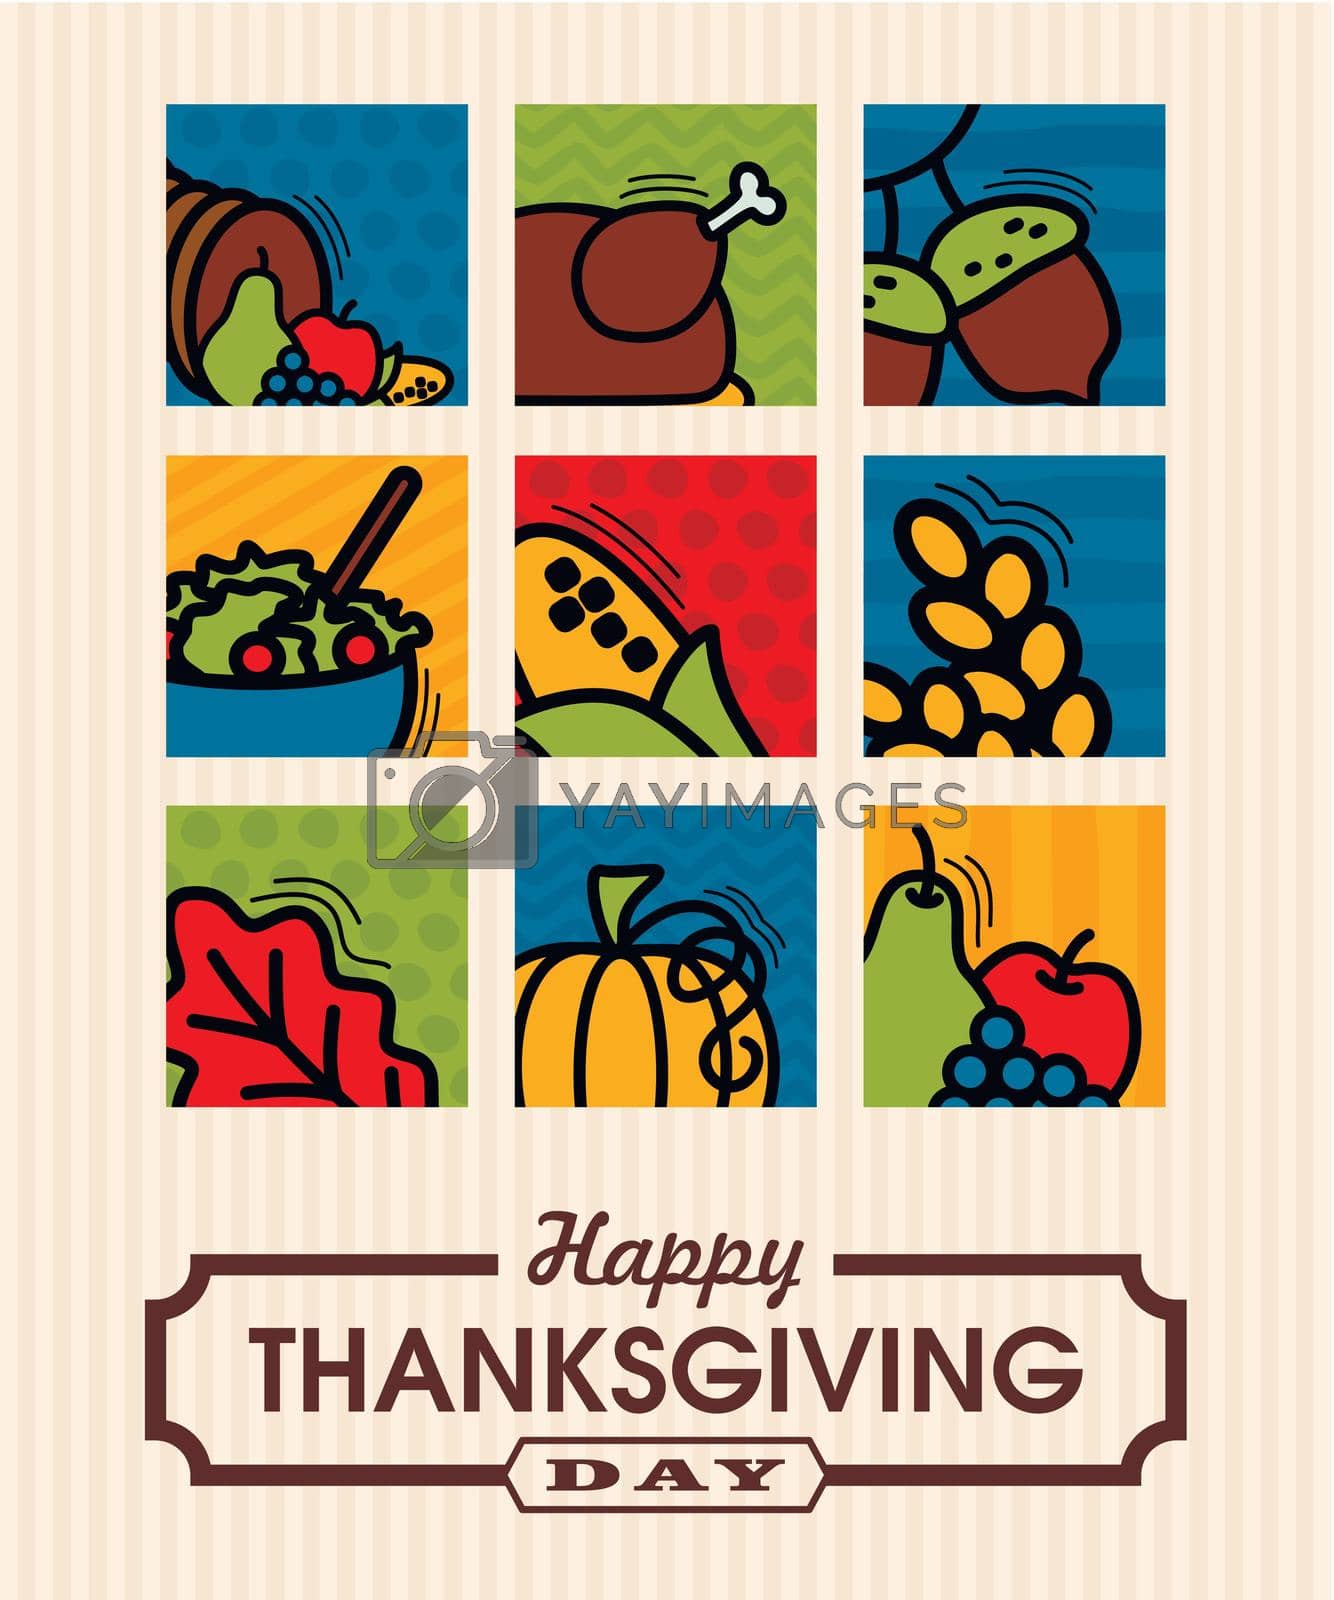 Royalty free image of Thanksgiving greeting card by nosik